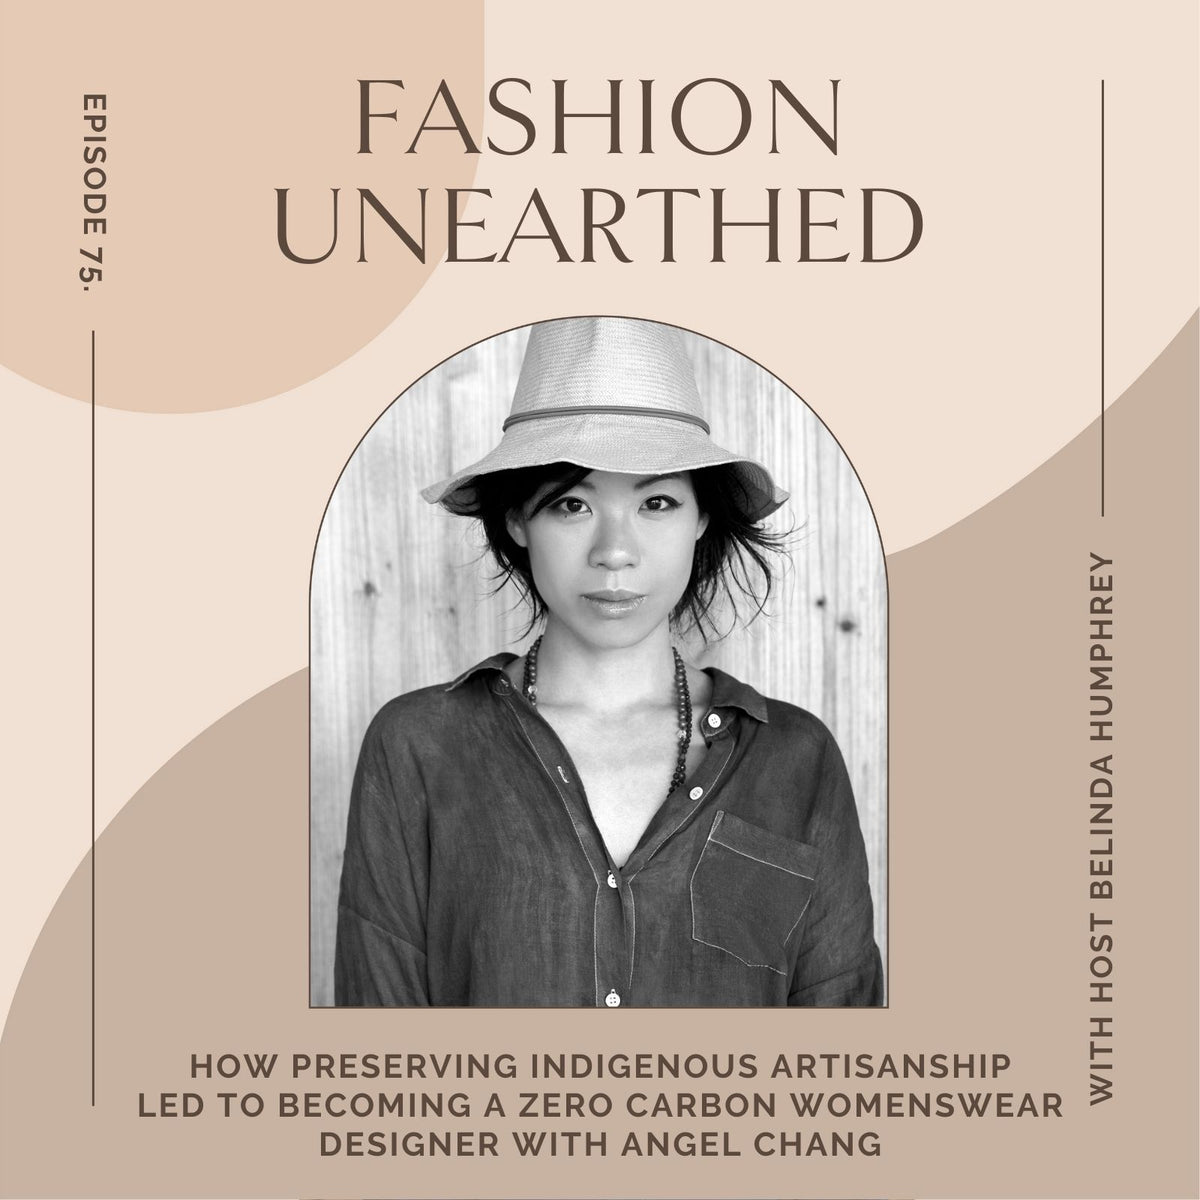 Episode 75: How preserving Indigenous artisanship led to becoming a zero carbon womenswear designer with Angel Chang